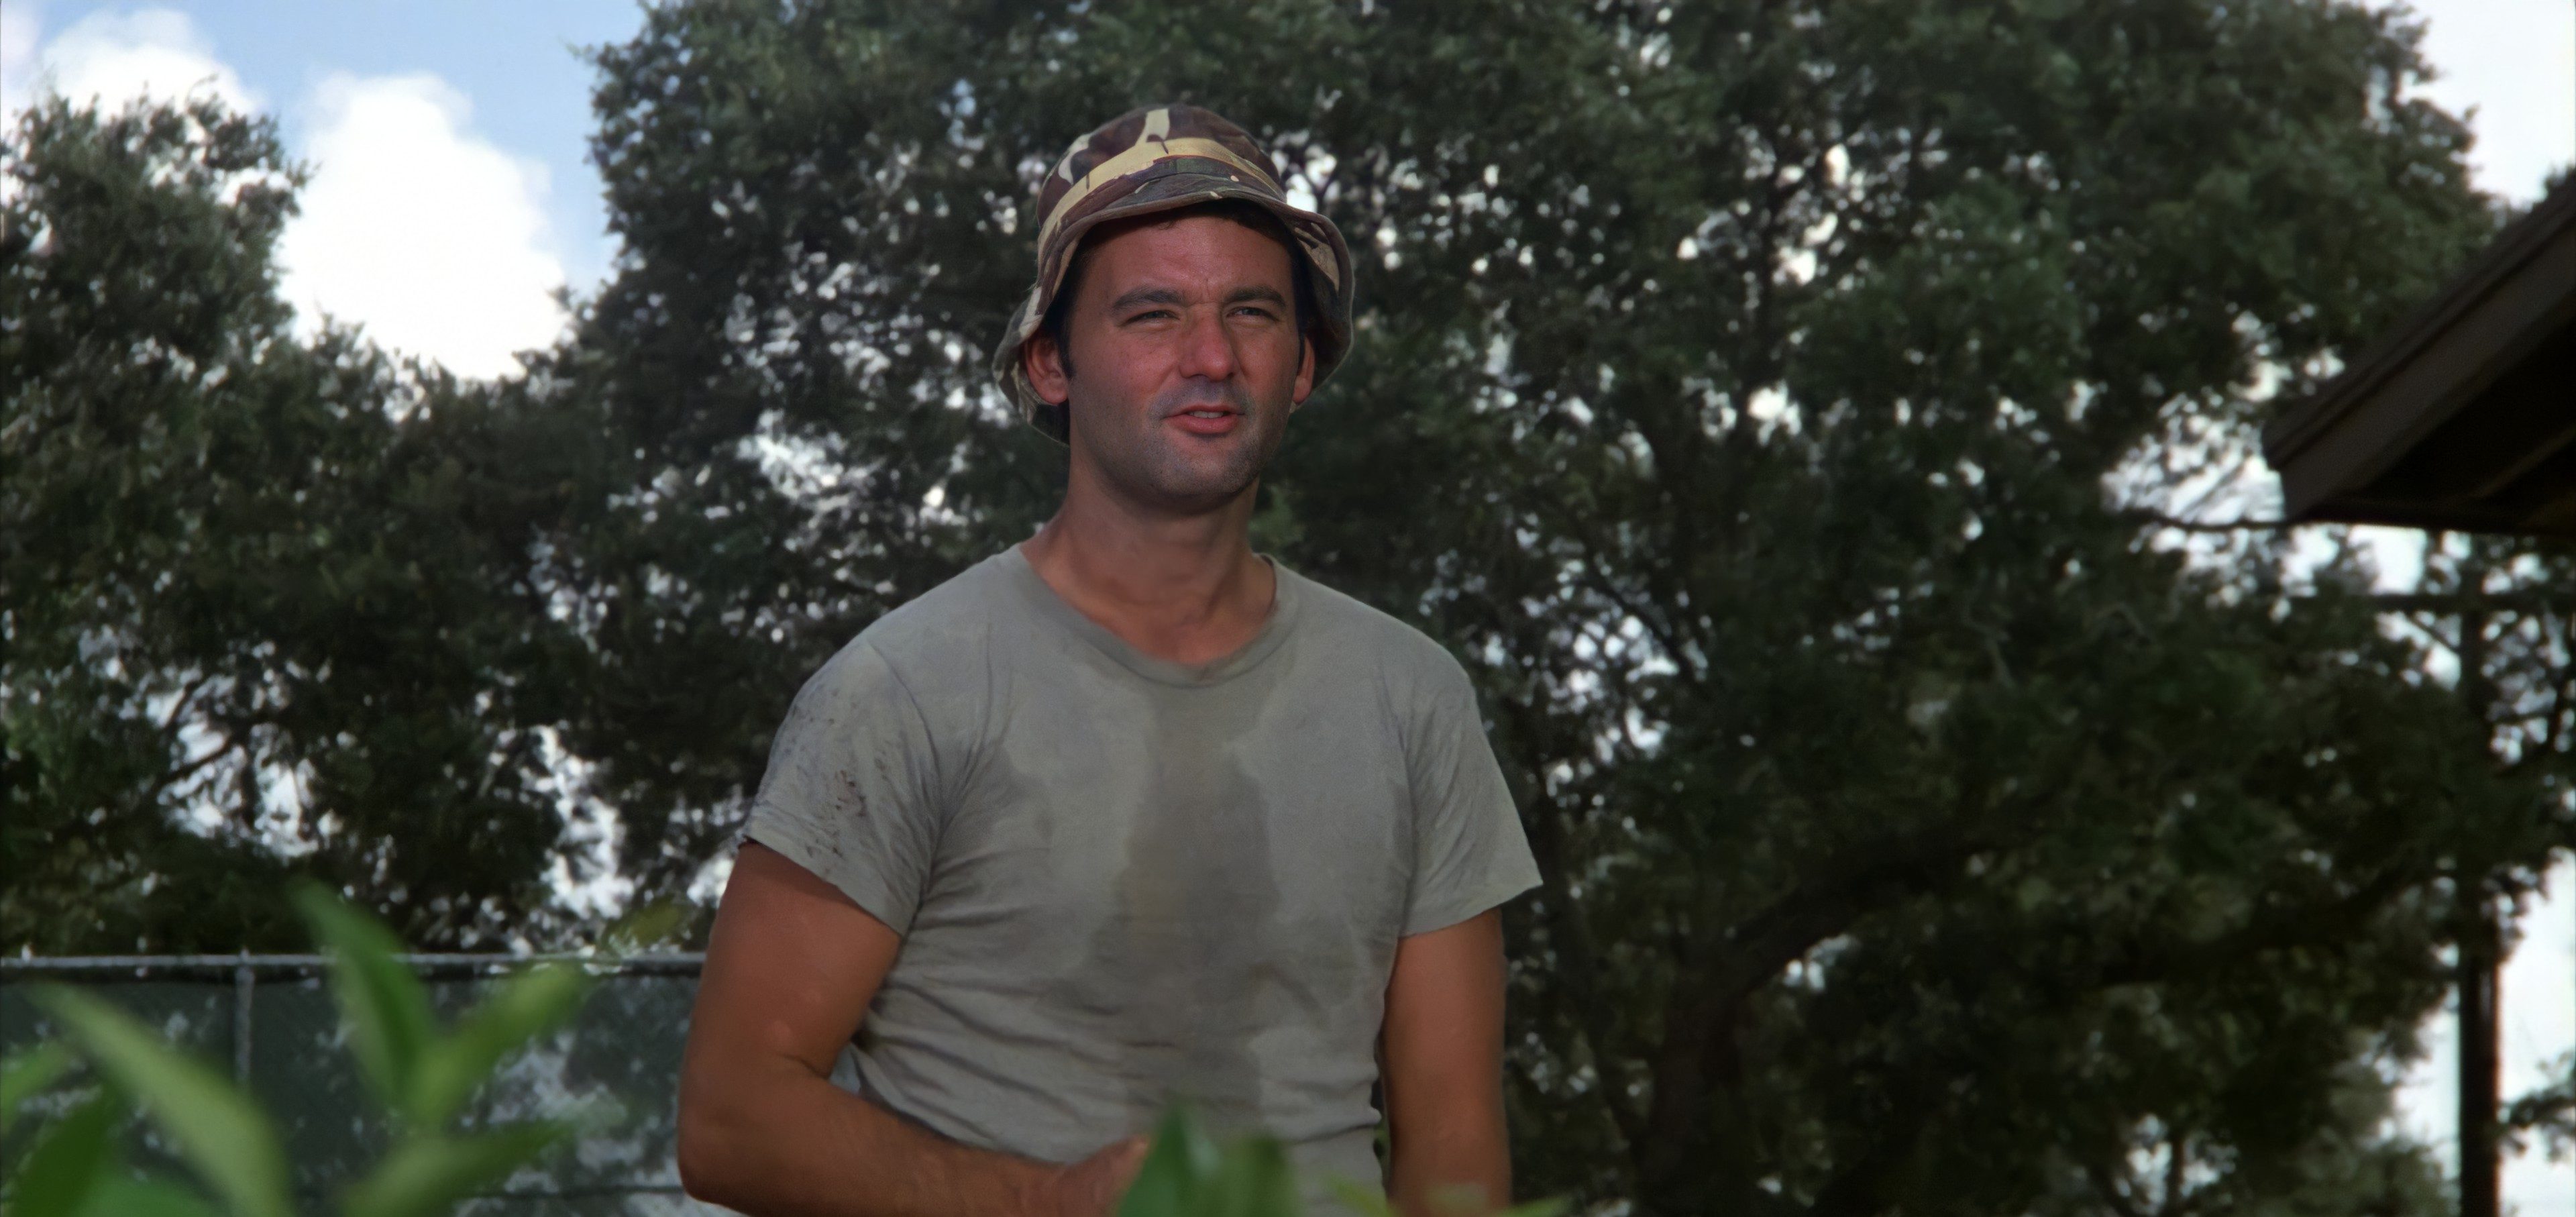 Is Caddyshack Based on a True Story?